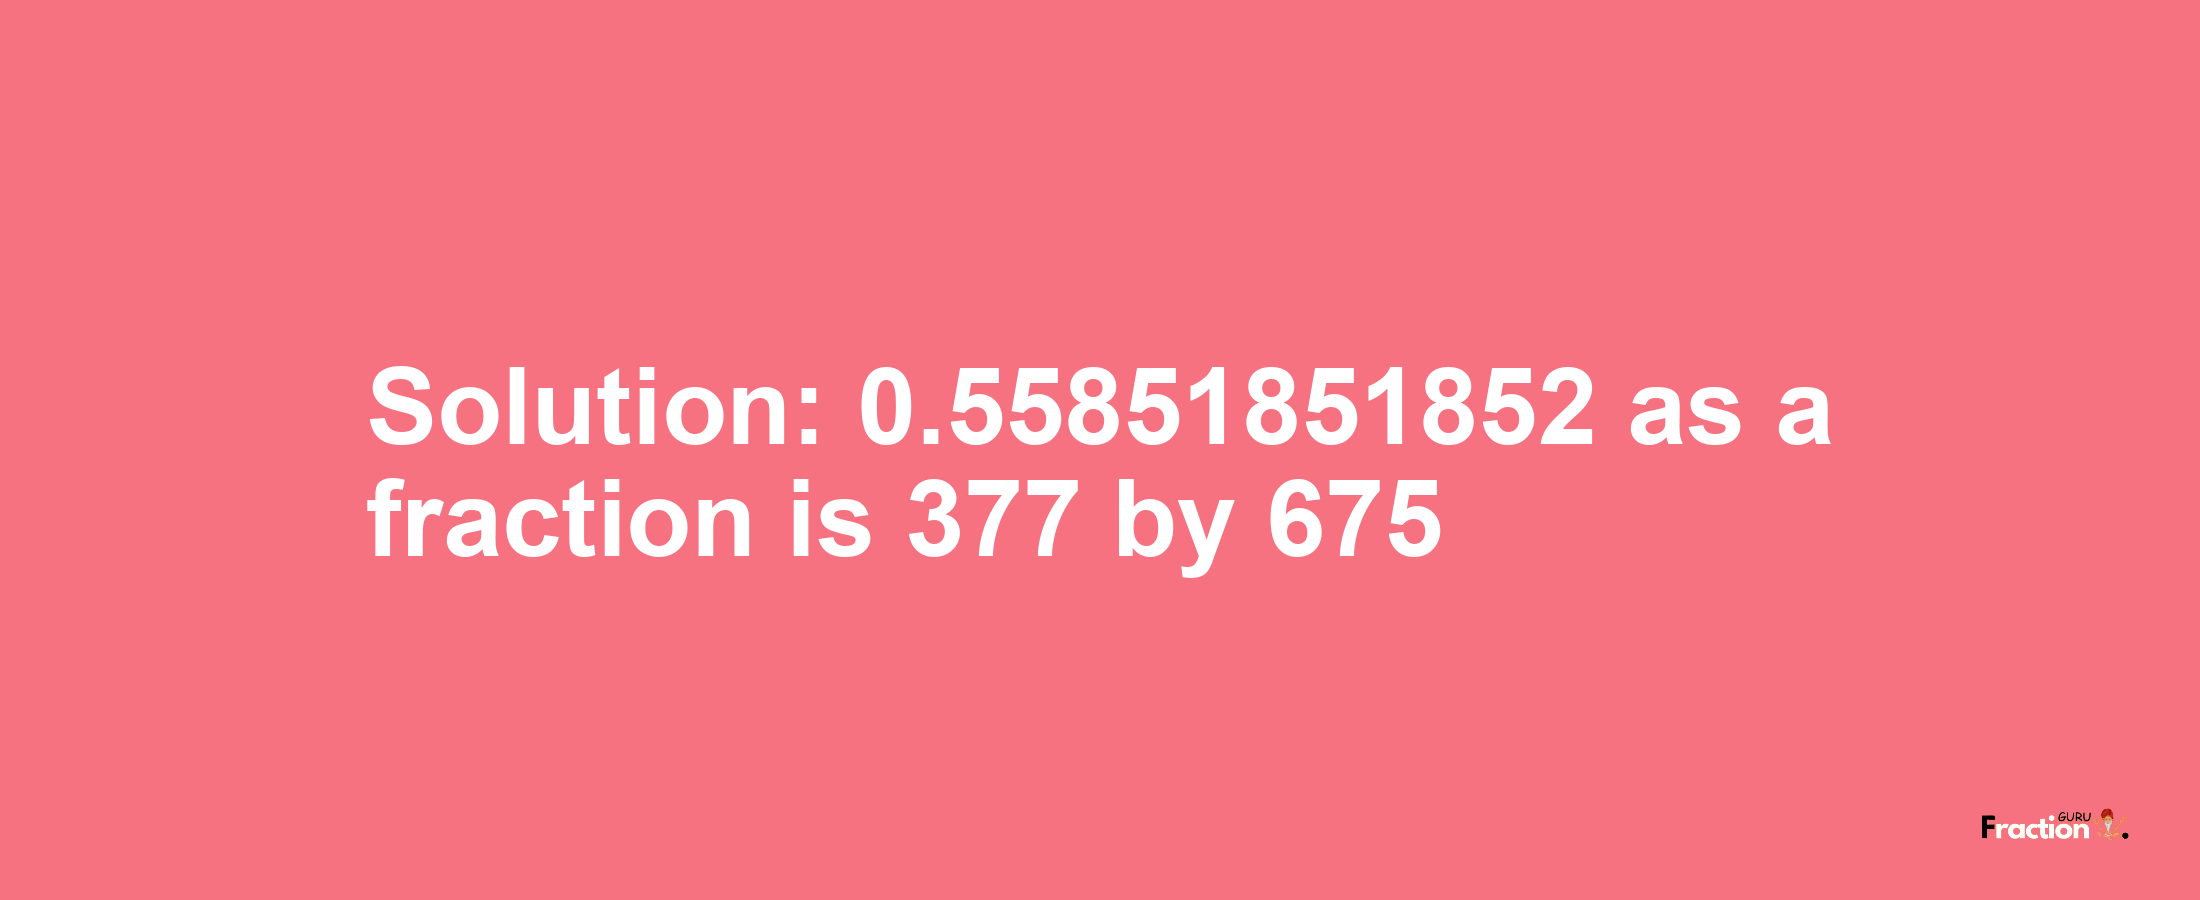 Solution:0.55851851852 as a fraction is 377/675